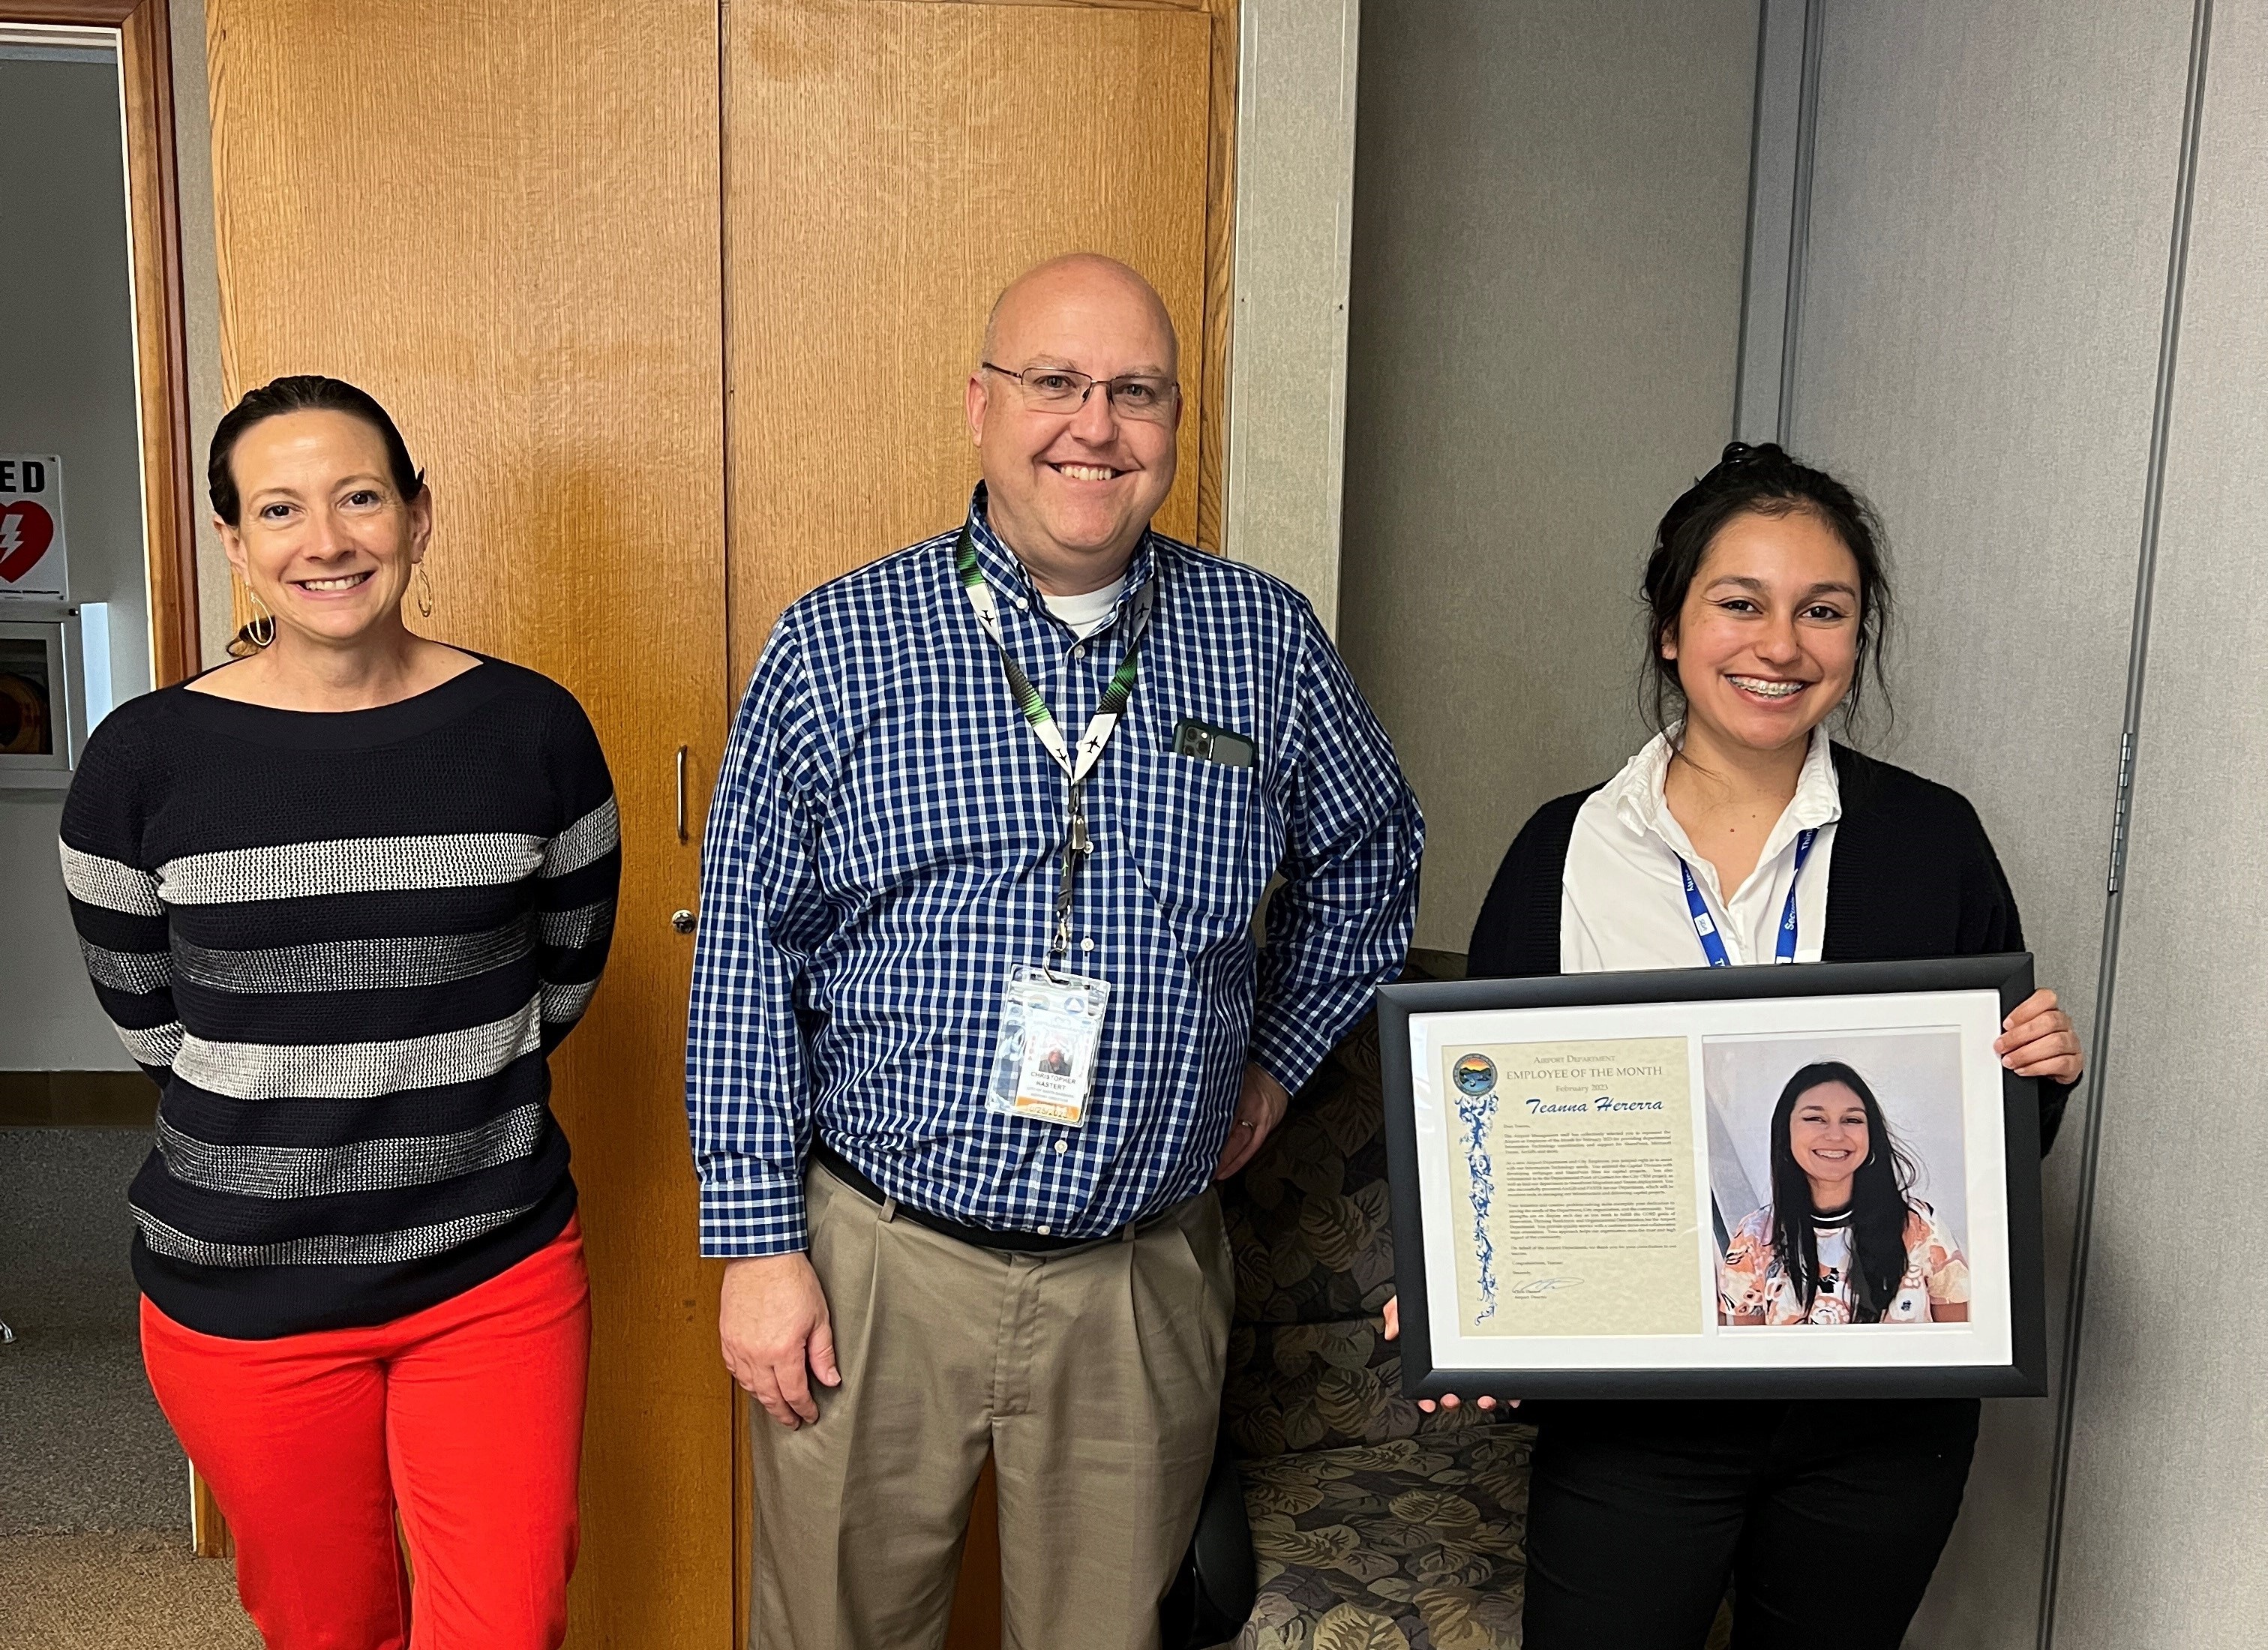 Teanna Herrera holding her recognition plaque, standing next to Chris (Airport Director) and Sara (Development Manager)